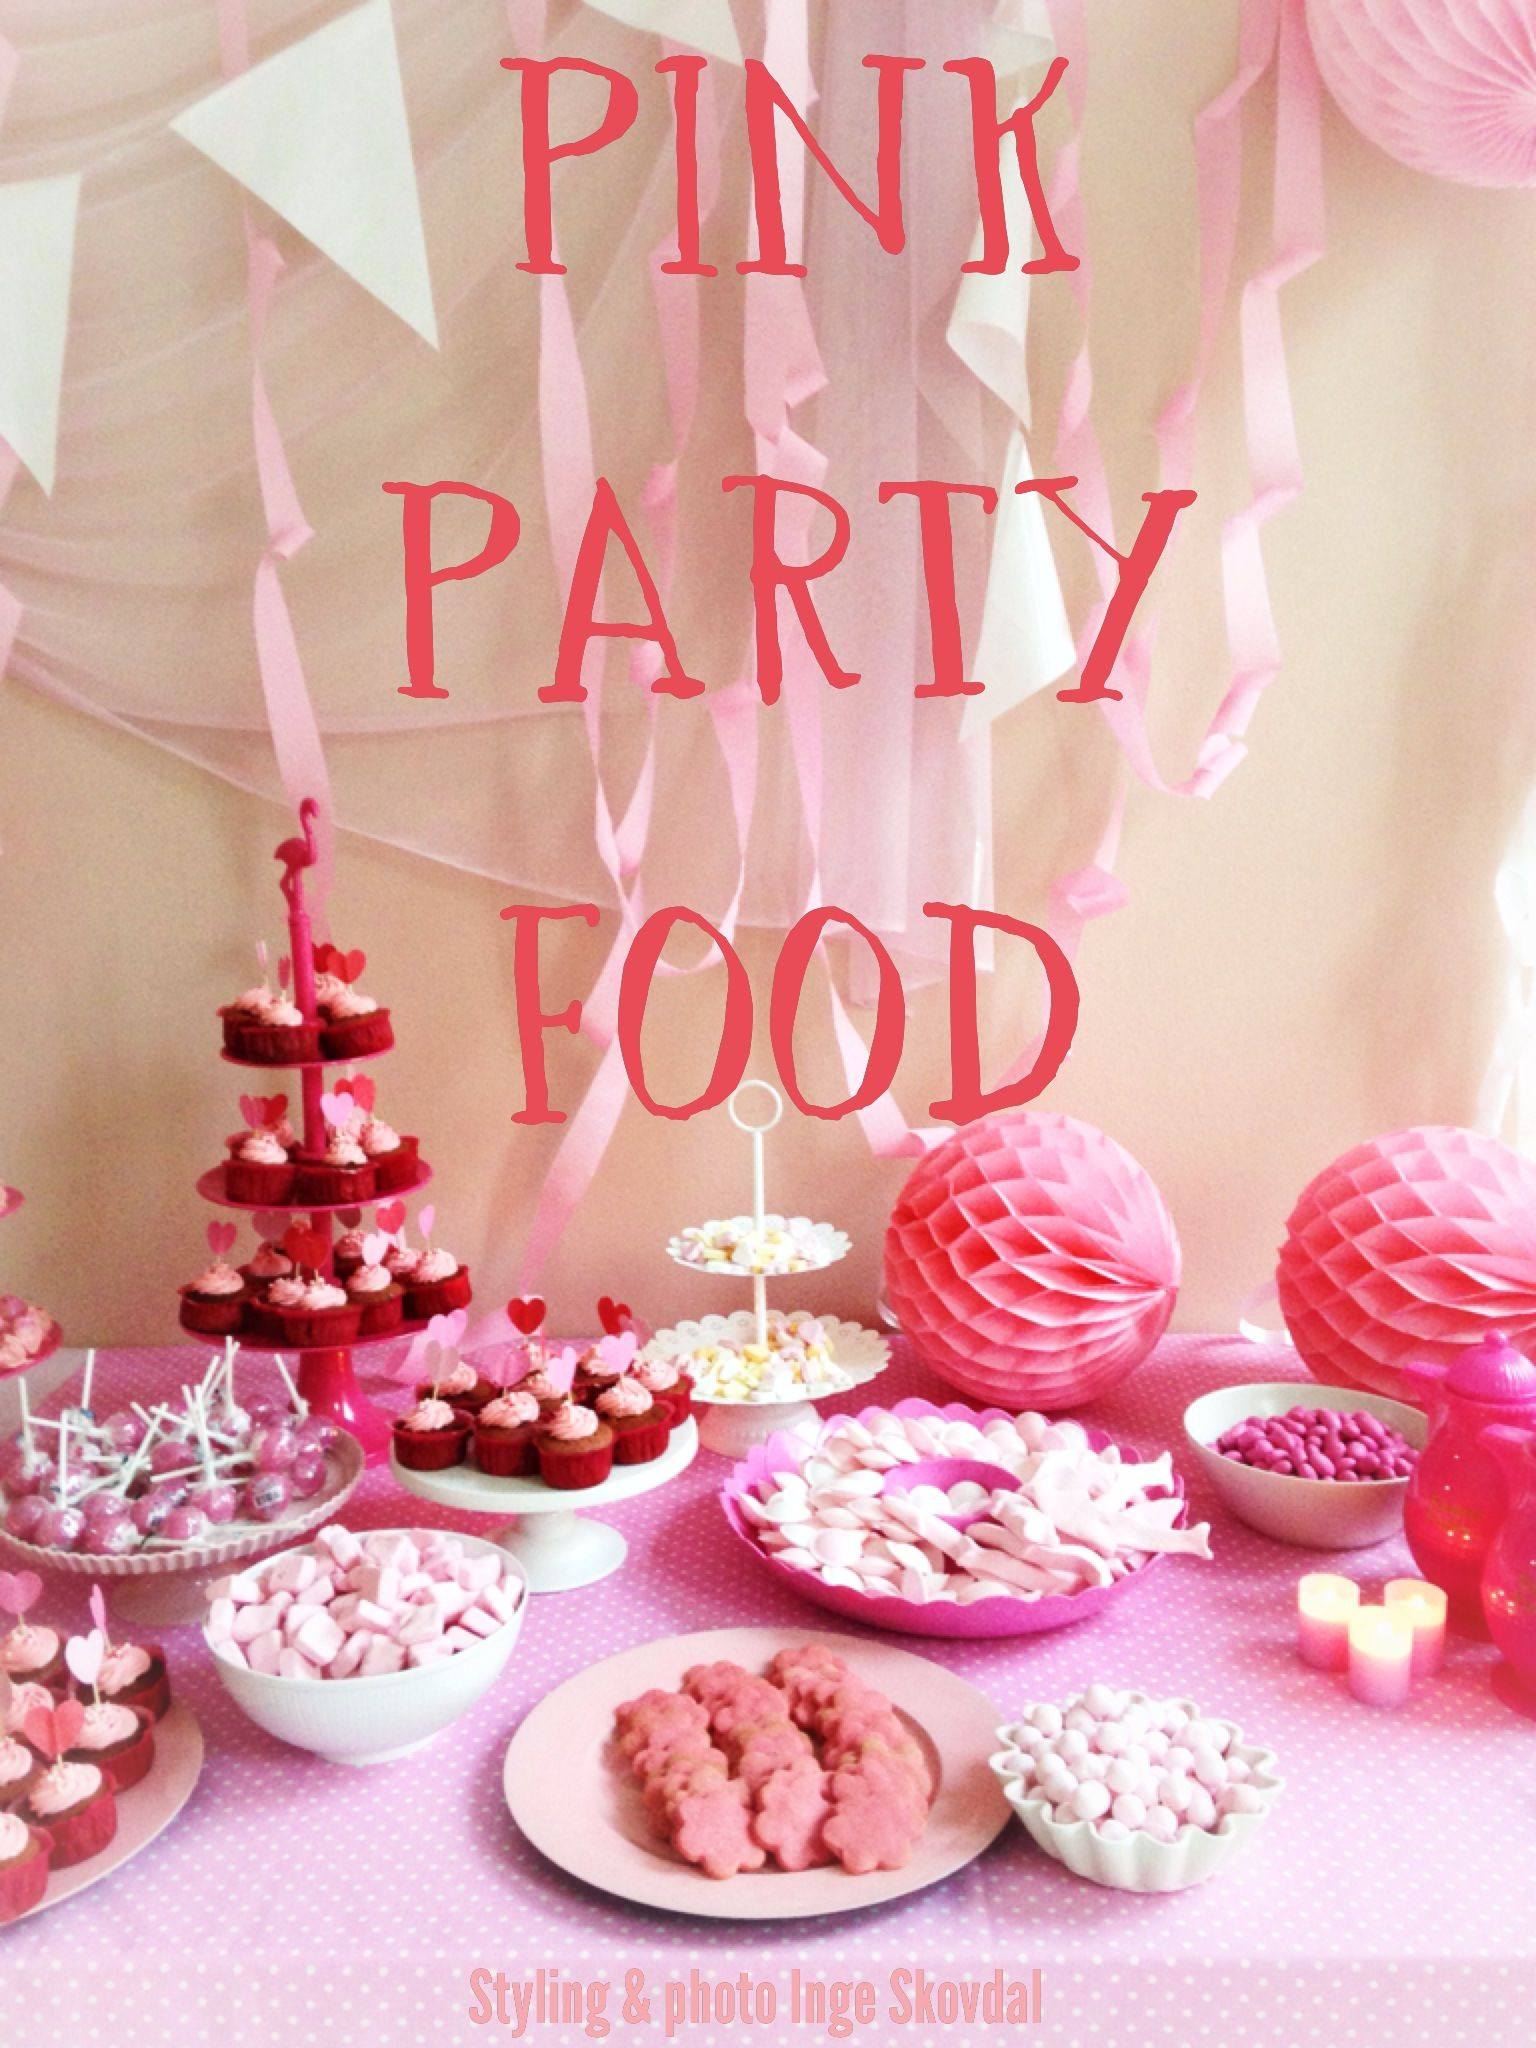 Pink Food Ideas For Breast Cancer Party
 pink party food Styling & photo Inge Skovdal